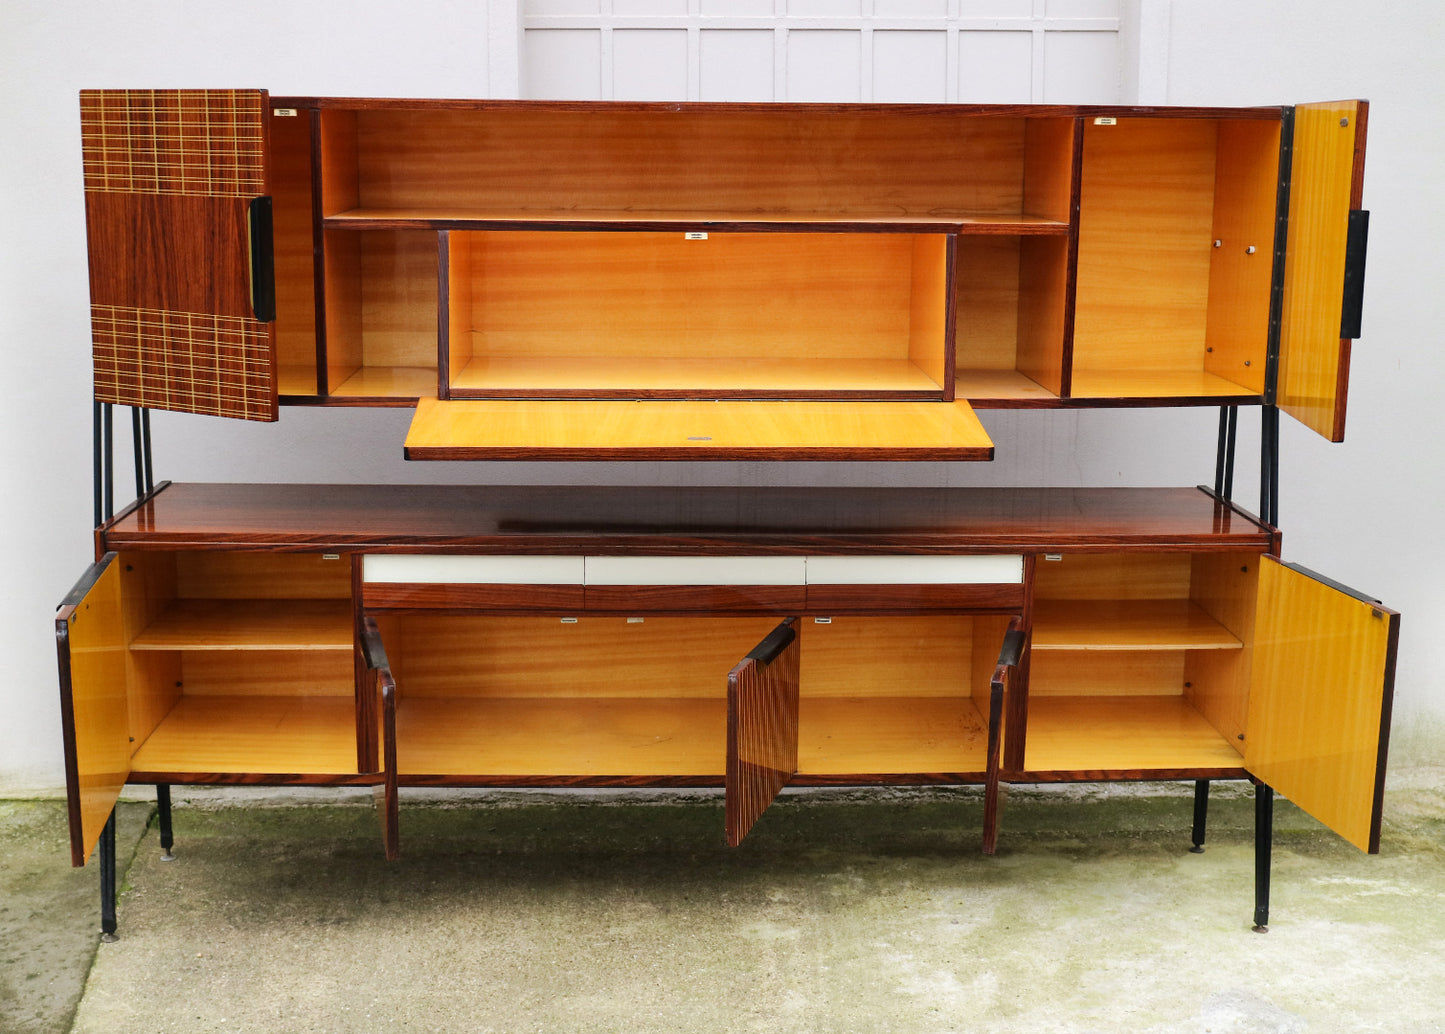 Vintage sideboard from the 50s and 60s